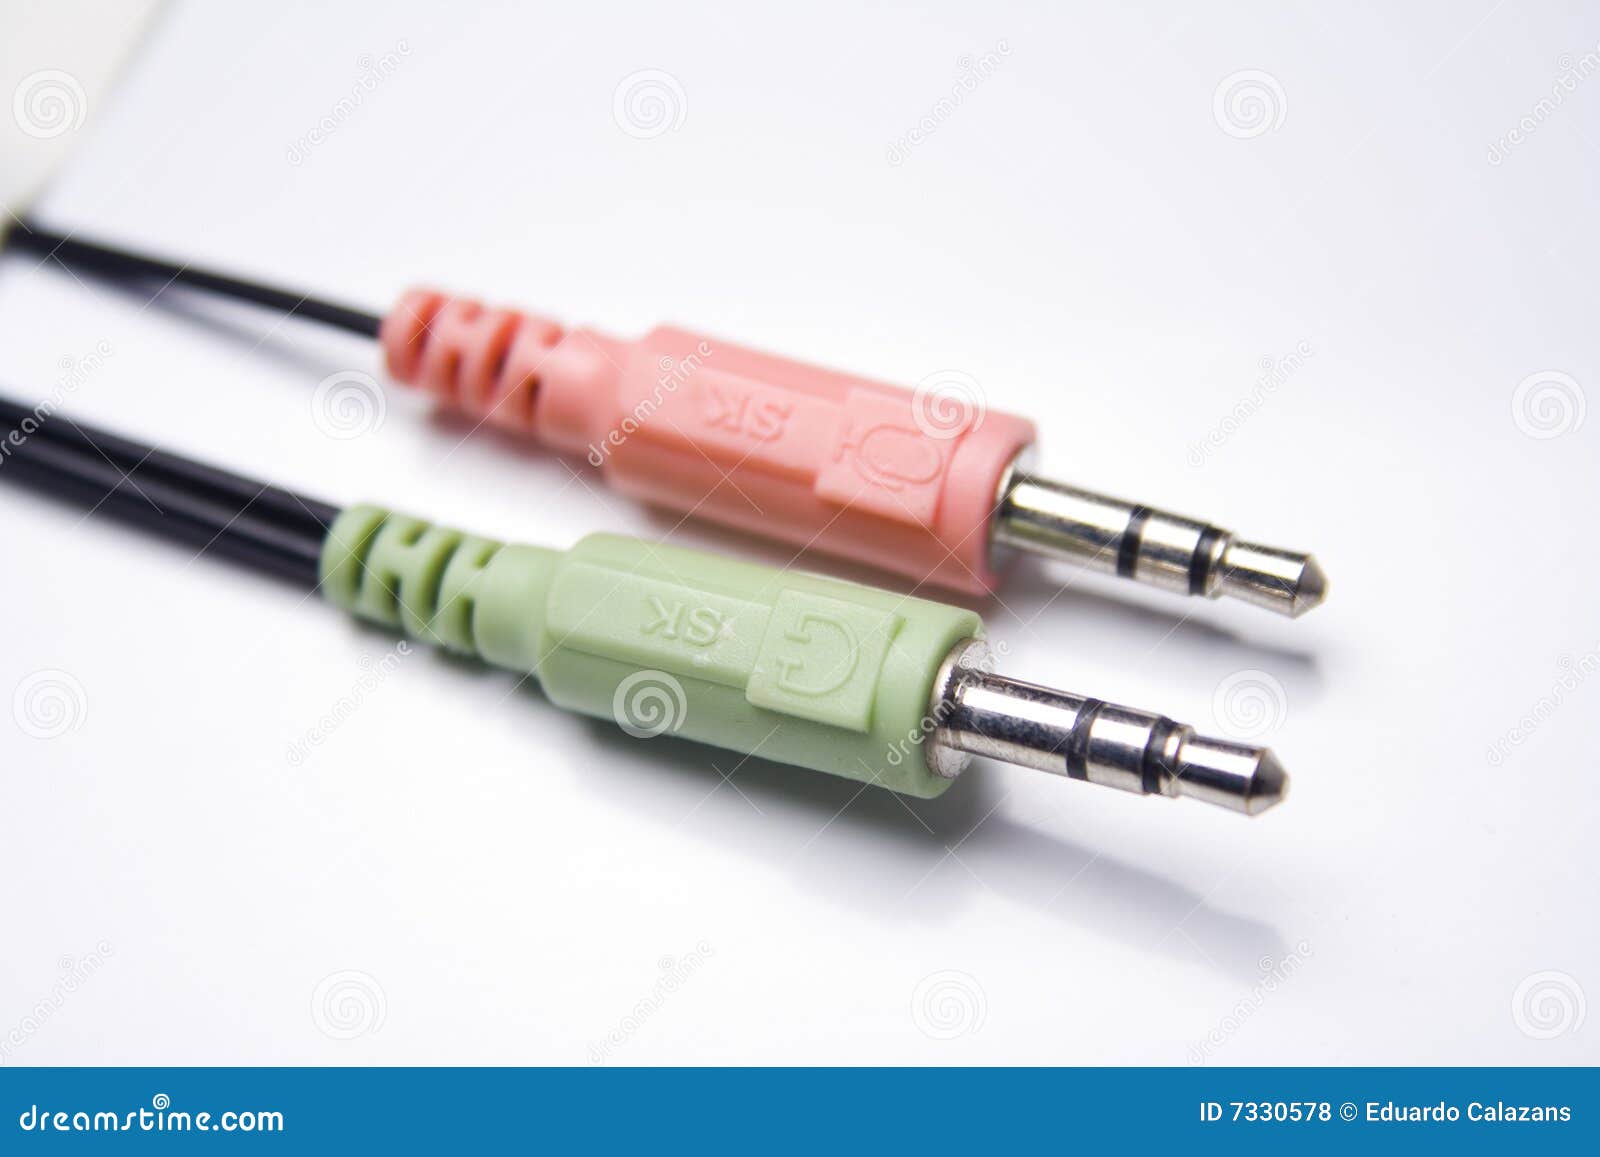 rca cable 2